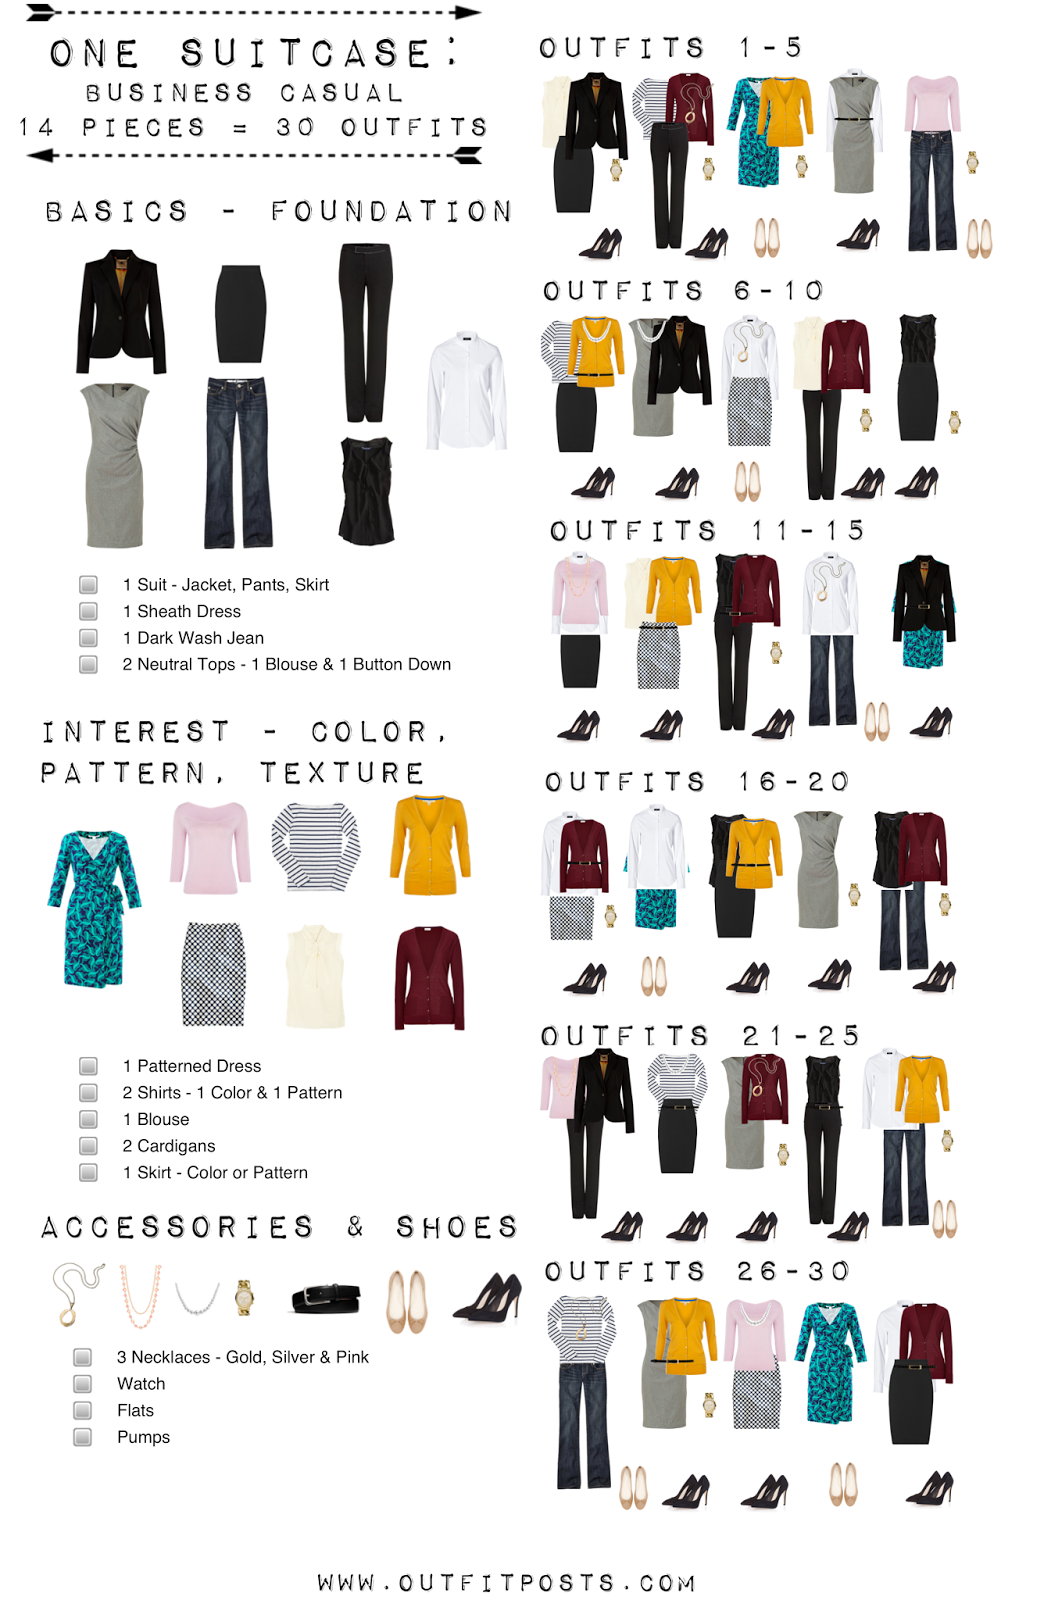 one suitcase: business casual capsule wardrobe | Outfit Posts